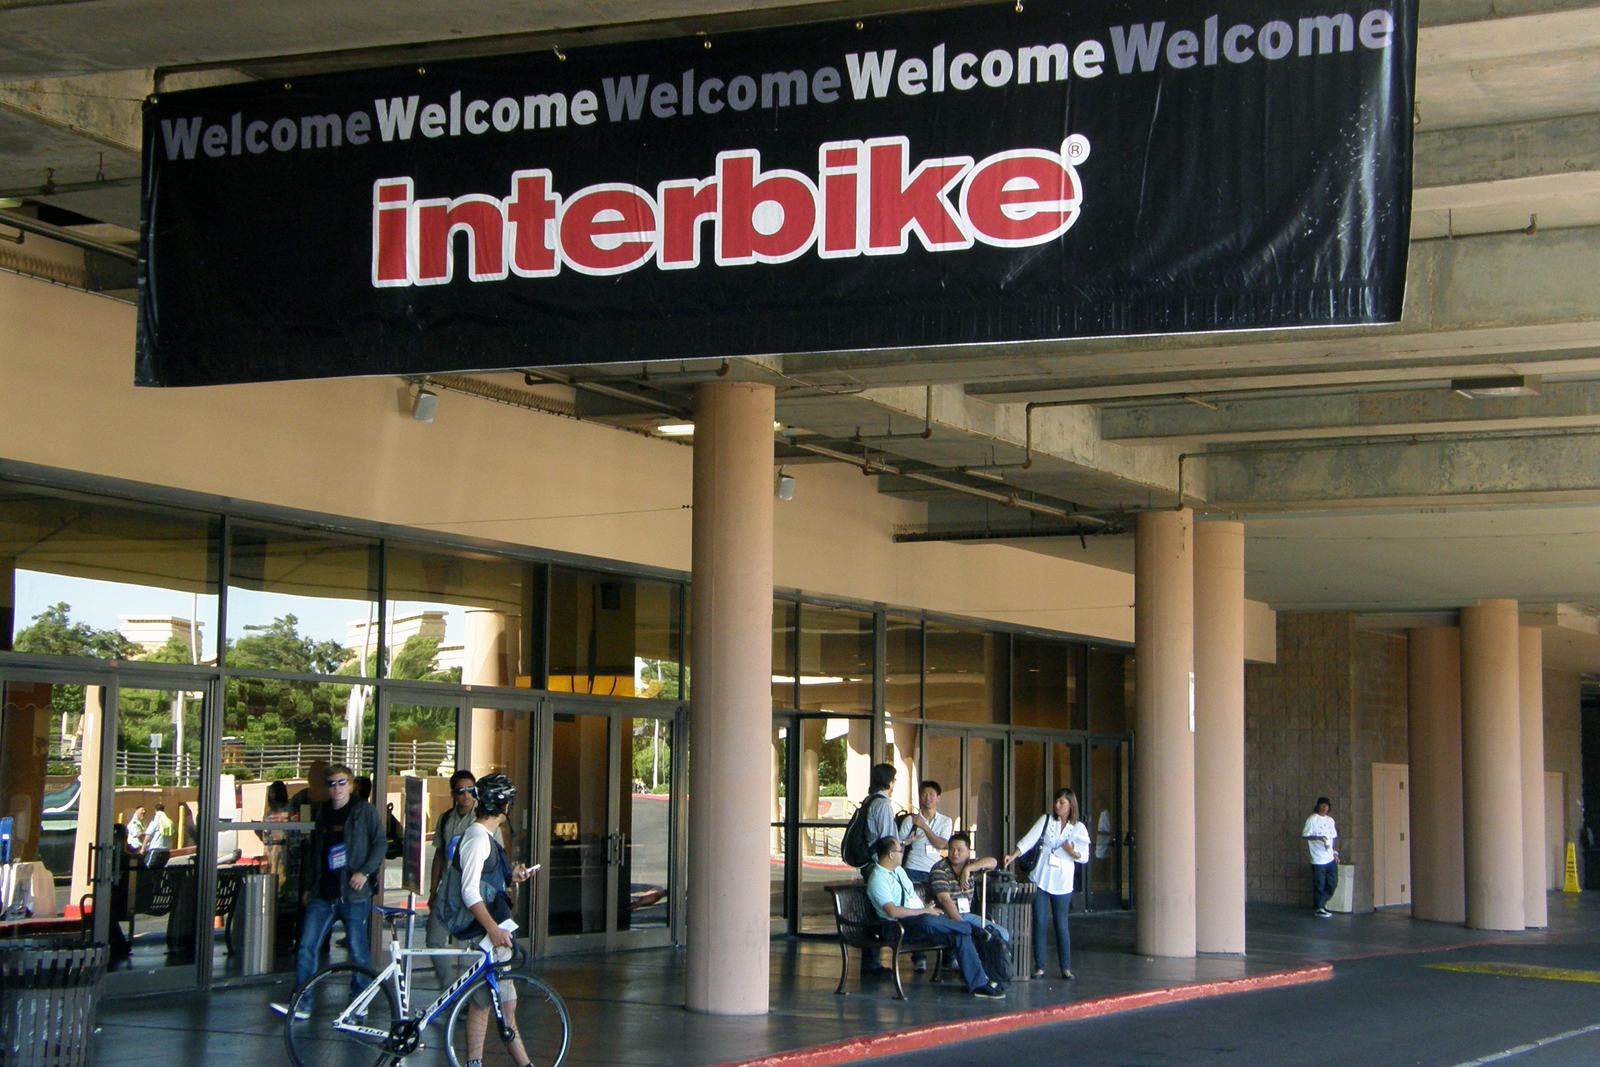 Onex Corp. bought Nielsen Expositions for USD950 million (€725m) with which the investment company became the owner of 65 business-to-business trade shows and conference events including Interbike as well as the US Outdoor Retailer show.